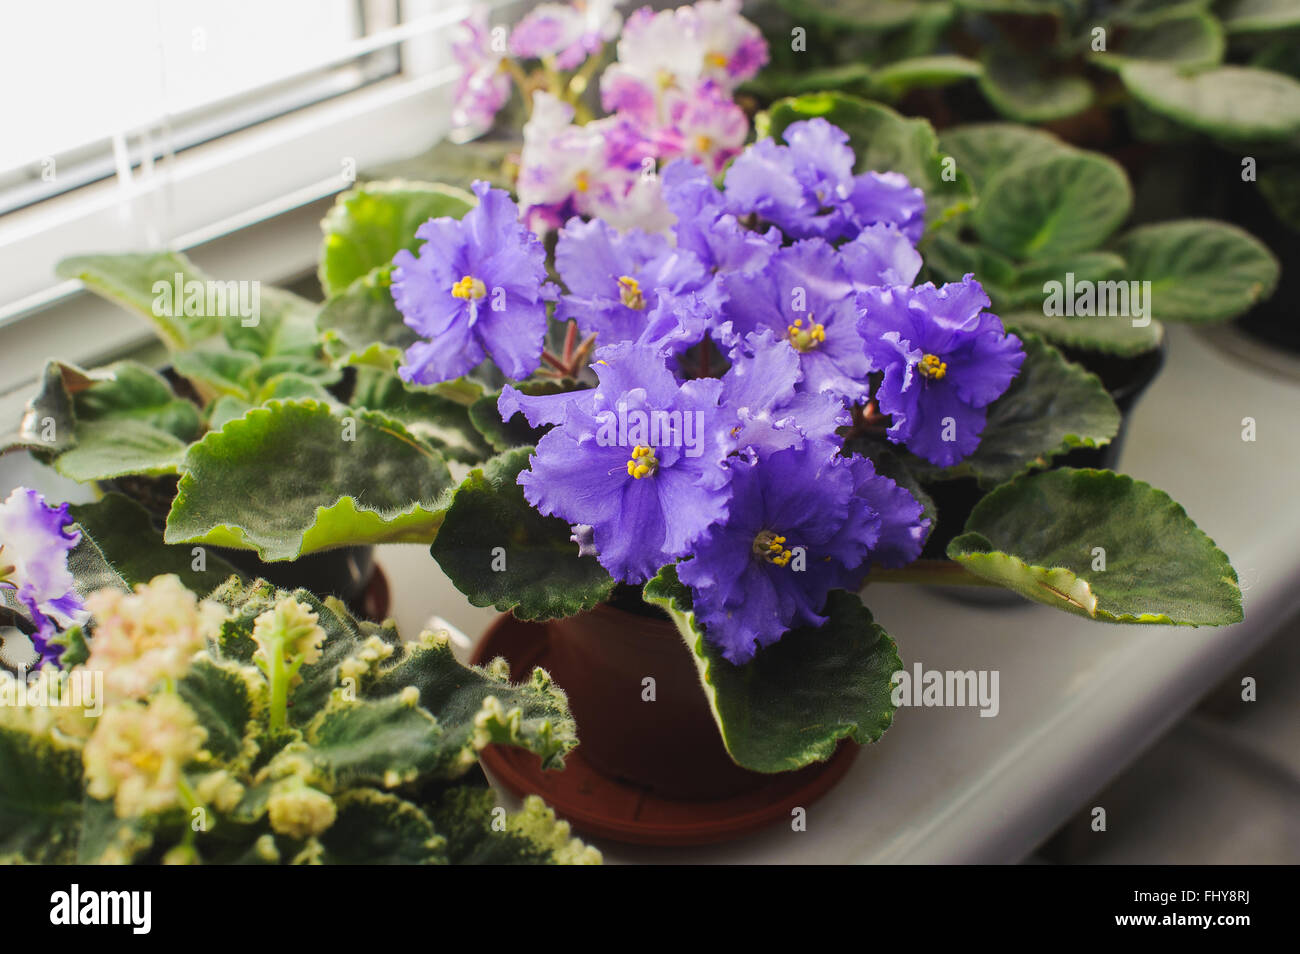 African Violet or Saintpaulia on the background of window with jalousie, shutter, houseplants. view from above. Stock Photo